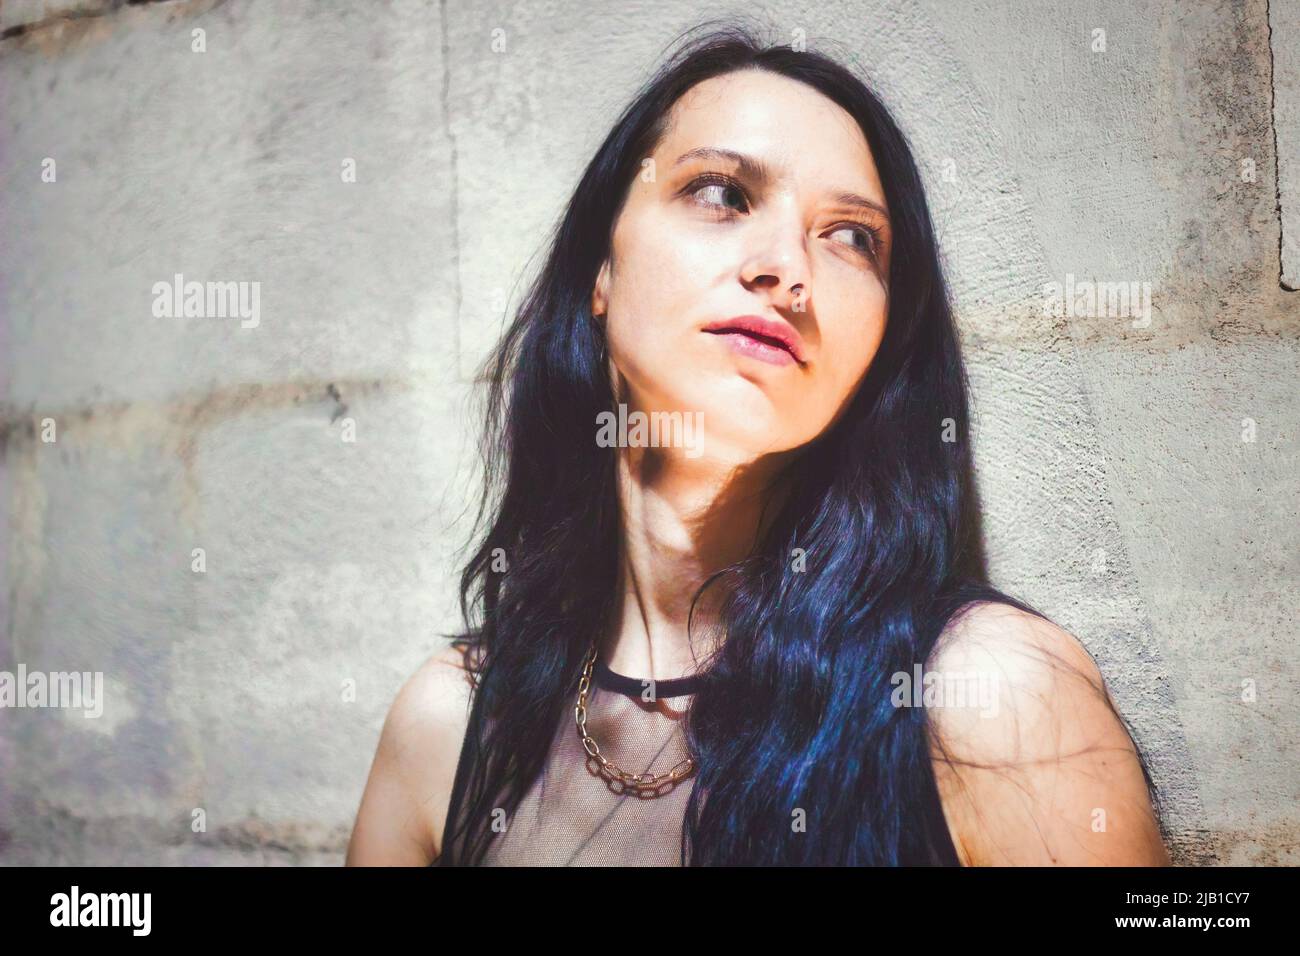 A goth girl leaning against a wall looking away from the camera Stock Photo